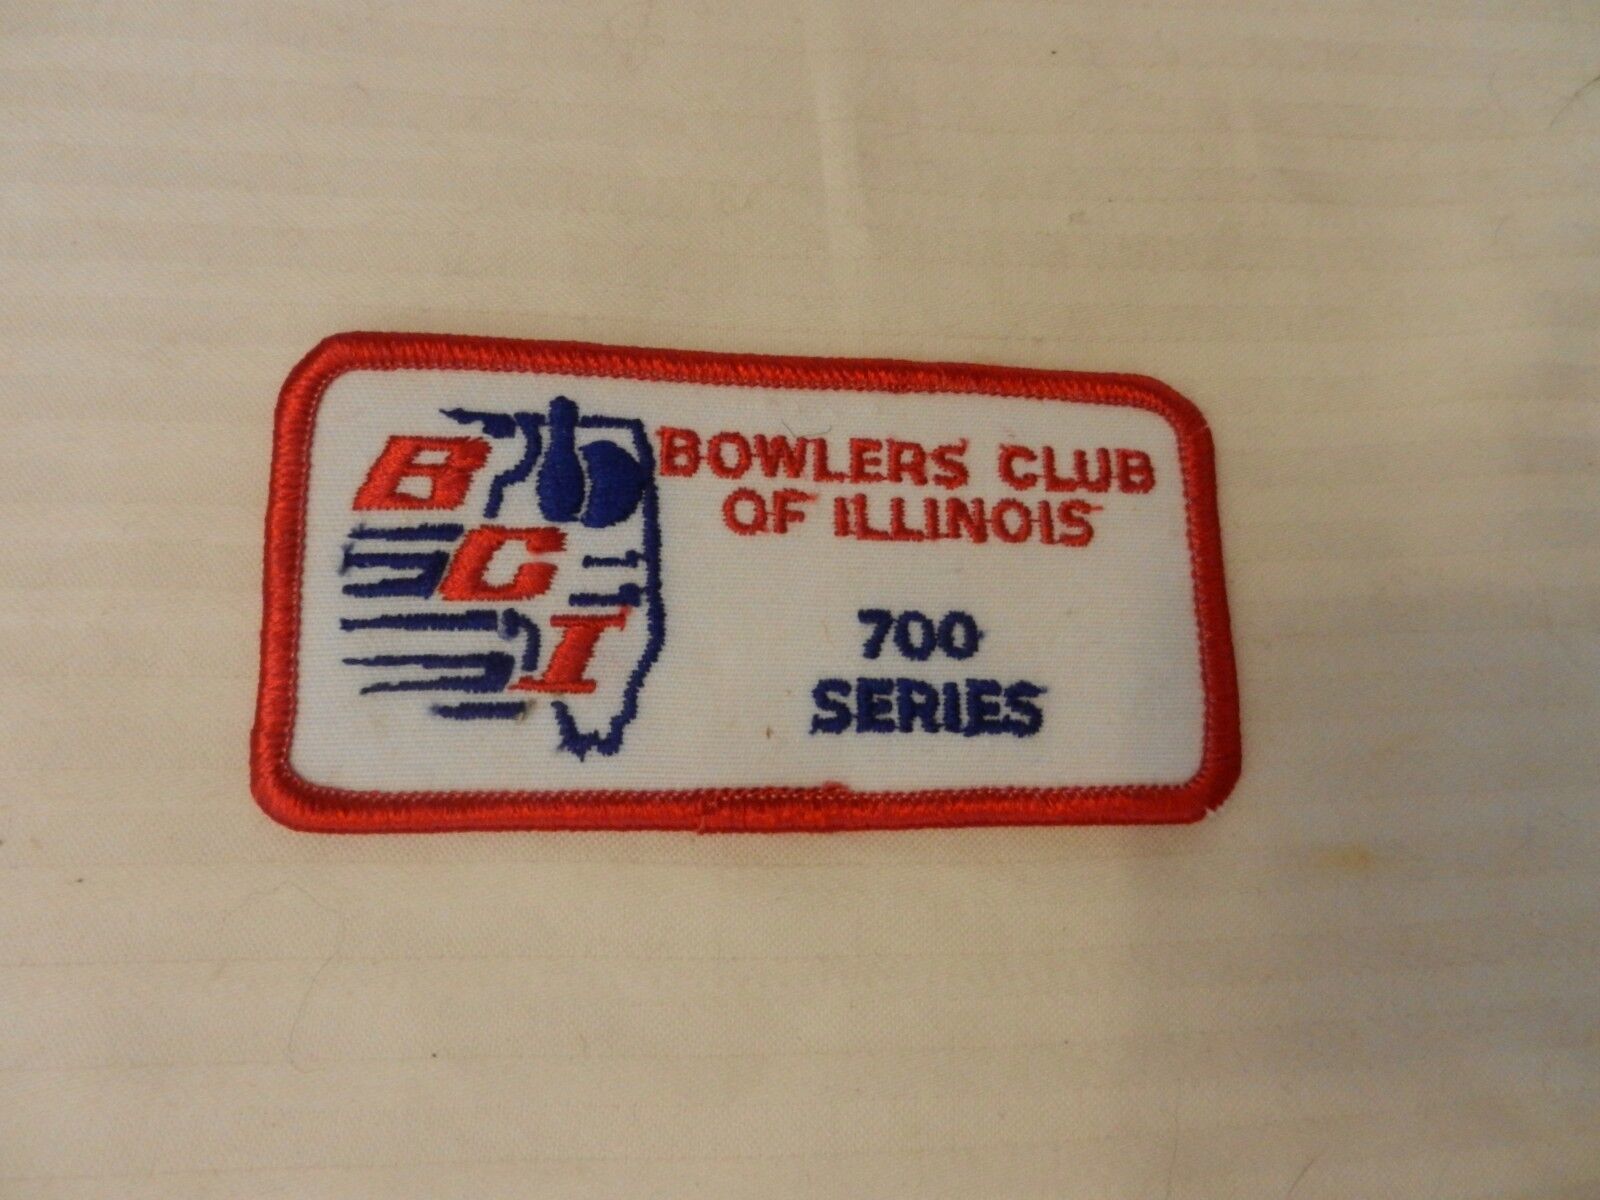 Primary image for Bowlers Club of Illinois 700 Series Patch from the 90s Red Border